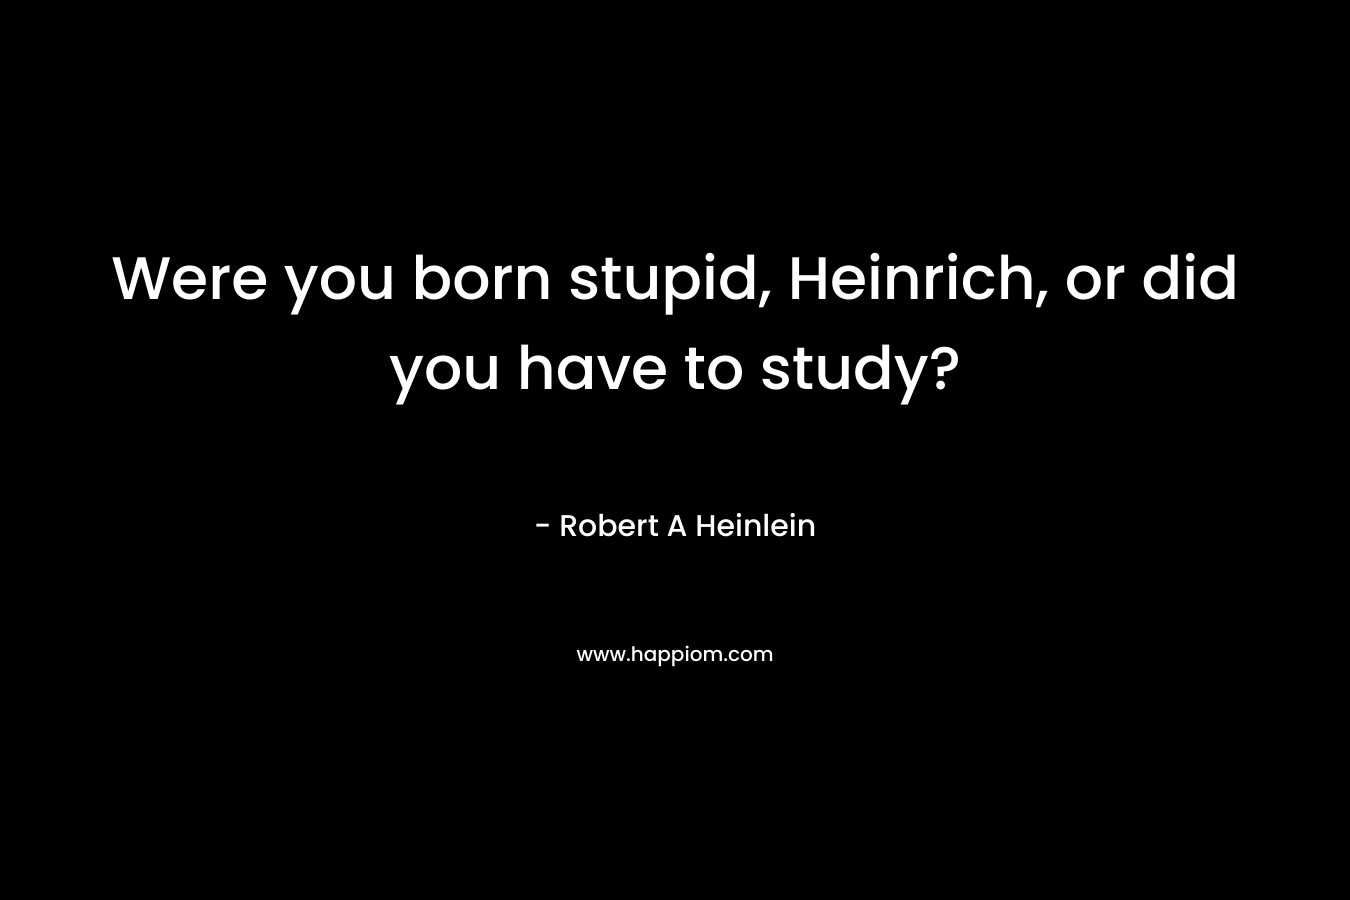 Were you born stupid, Heinrich, or did you have to study? – Robert A Heinlein